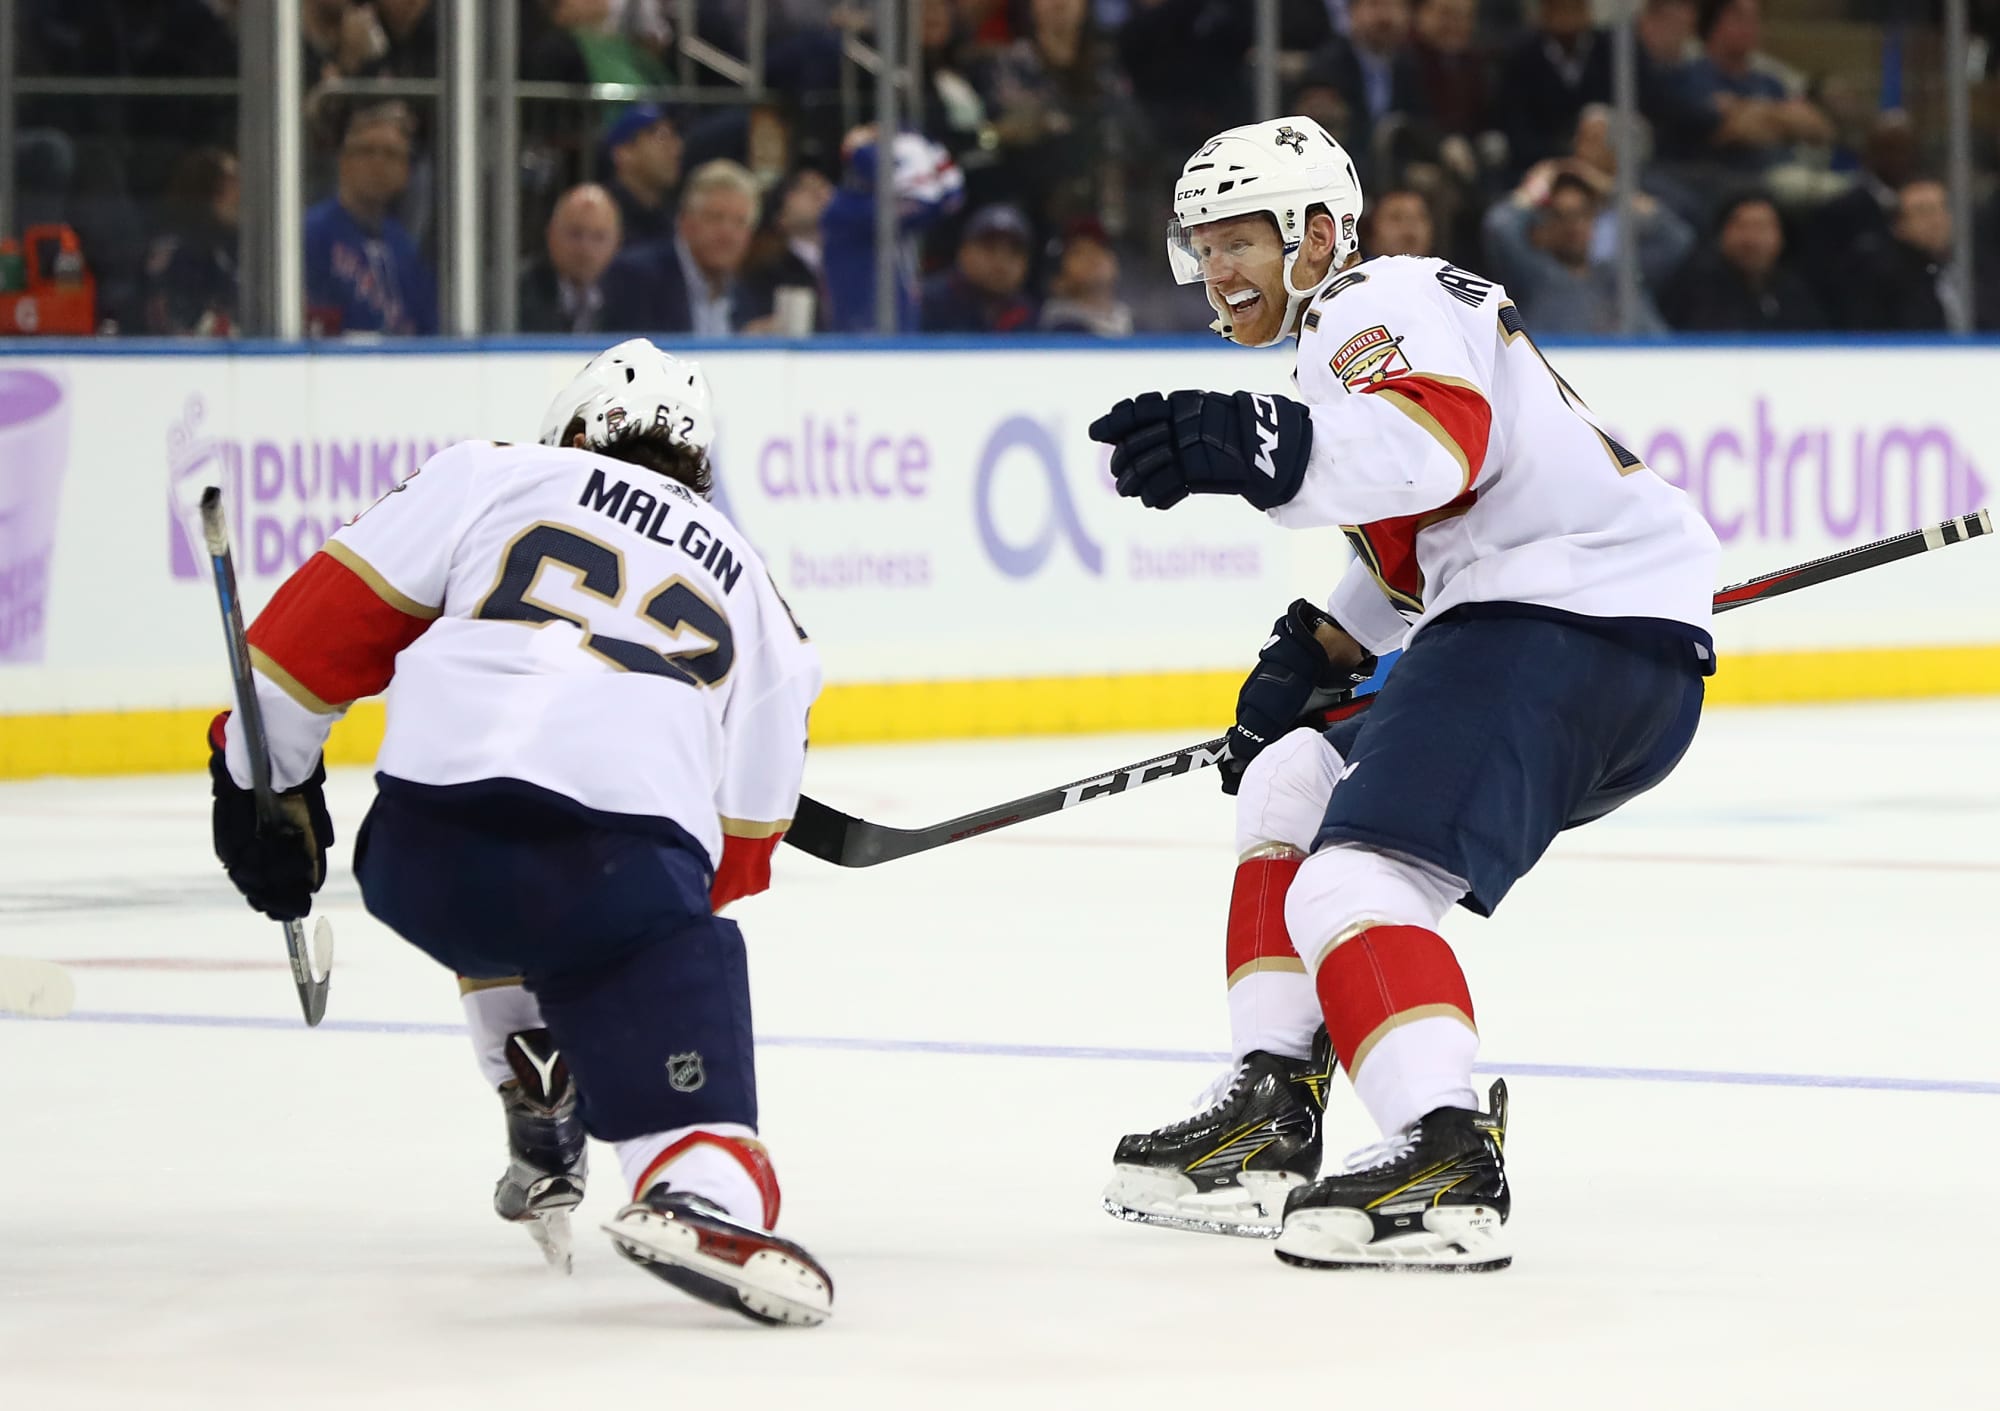 Florida Panthers come out on top, defeat the New York Rangers 5-4